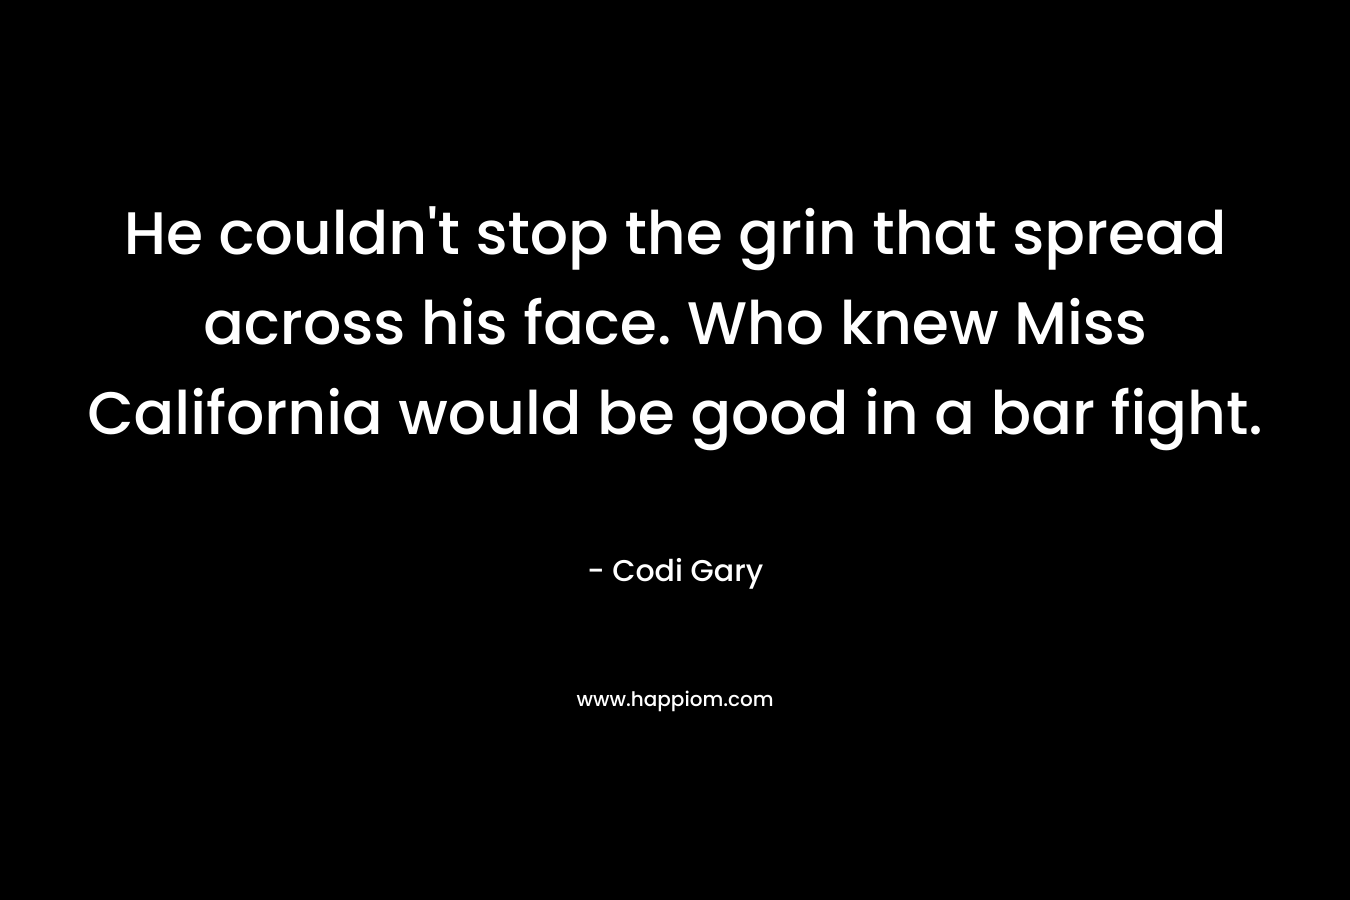 He couldn’t stop the grin that spread across his face. Who knew Miss California would be good in a bar fight. – Codi Gary